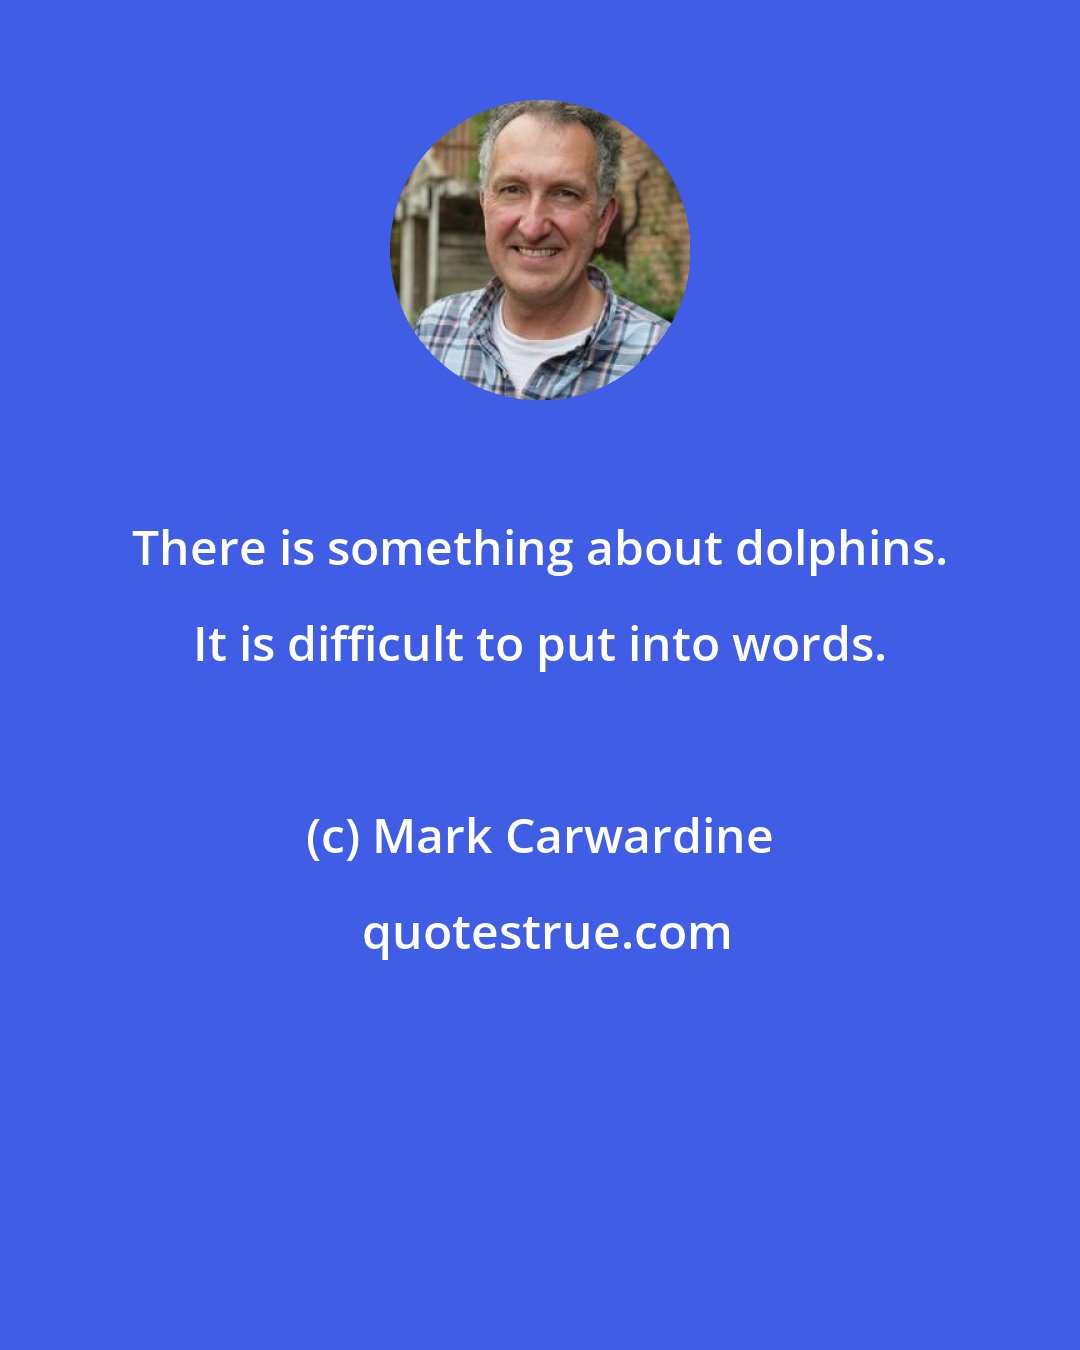 Mark Carwardine: There is something about dolphins. It is difficult to put into words.